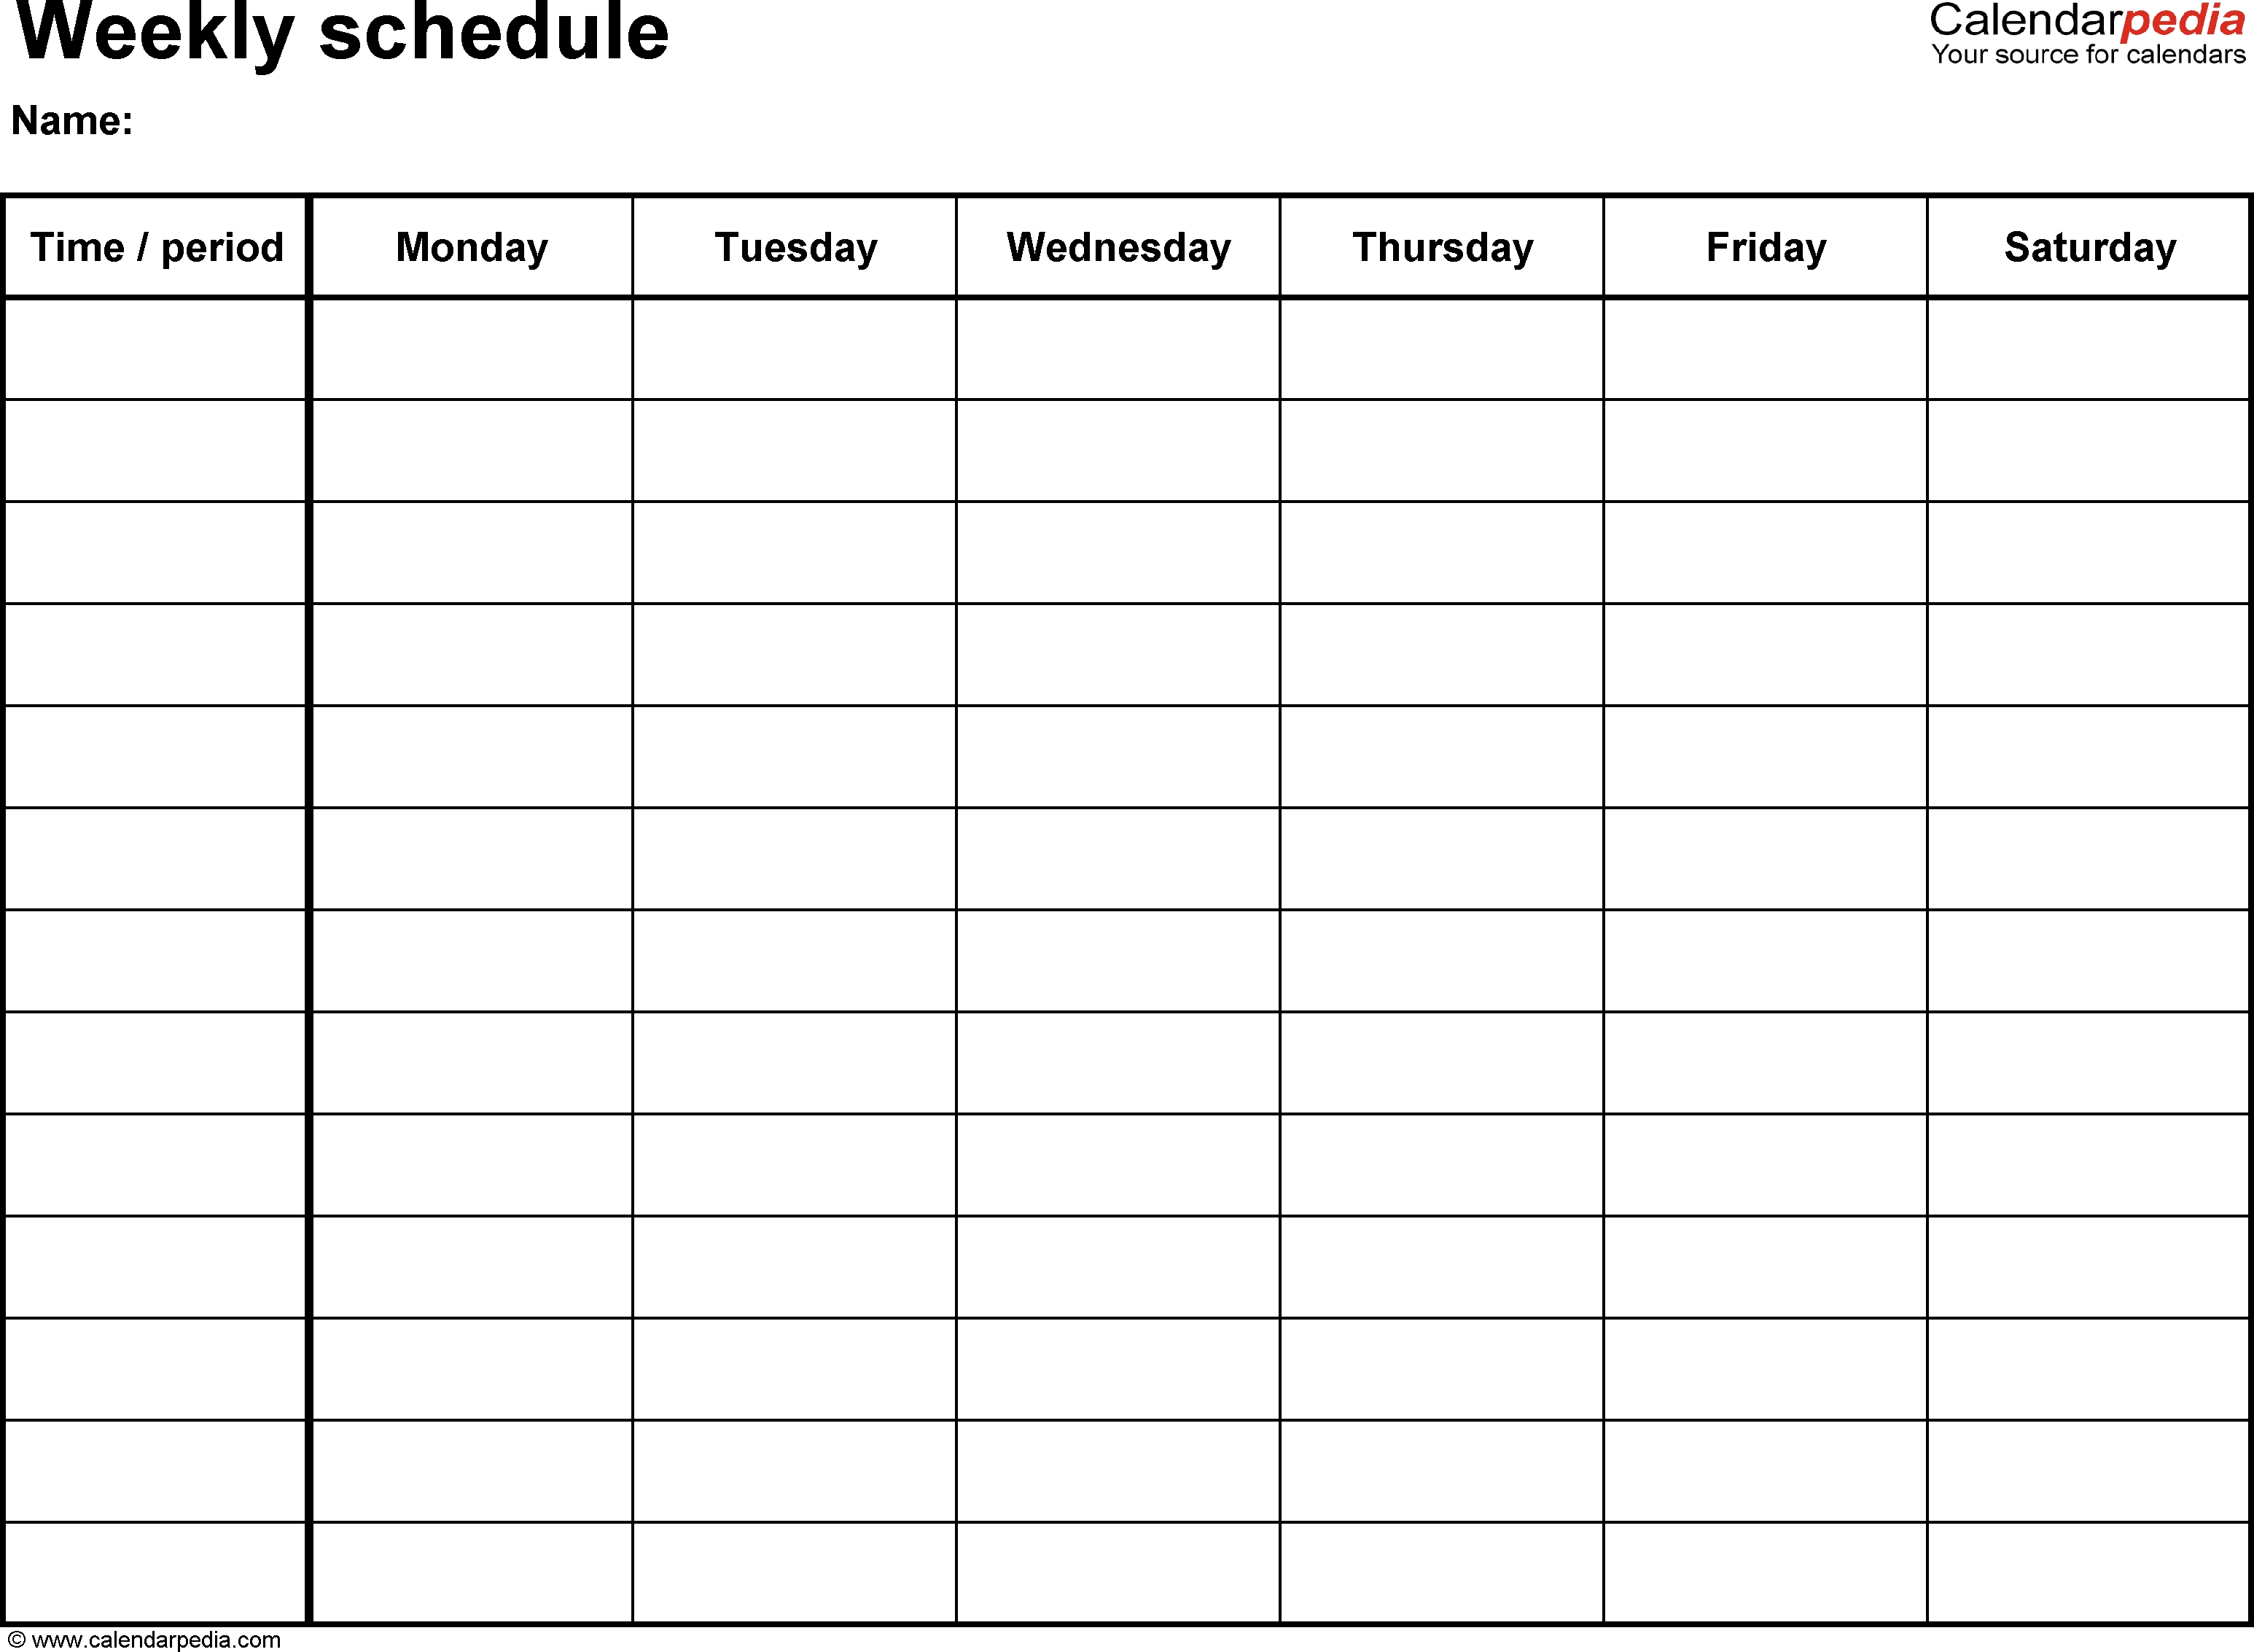 Free Weekly Schedule Templates For Pdf - 18 Templates with Free Printable Weekly Calendar Pdf